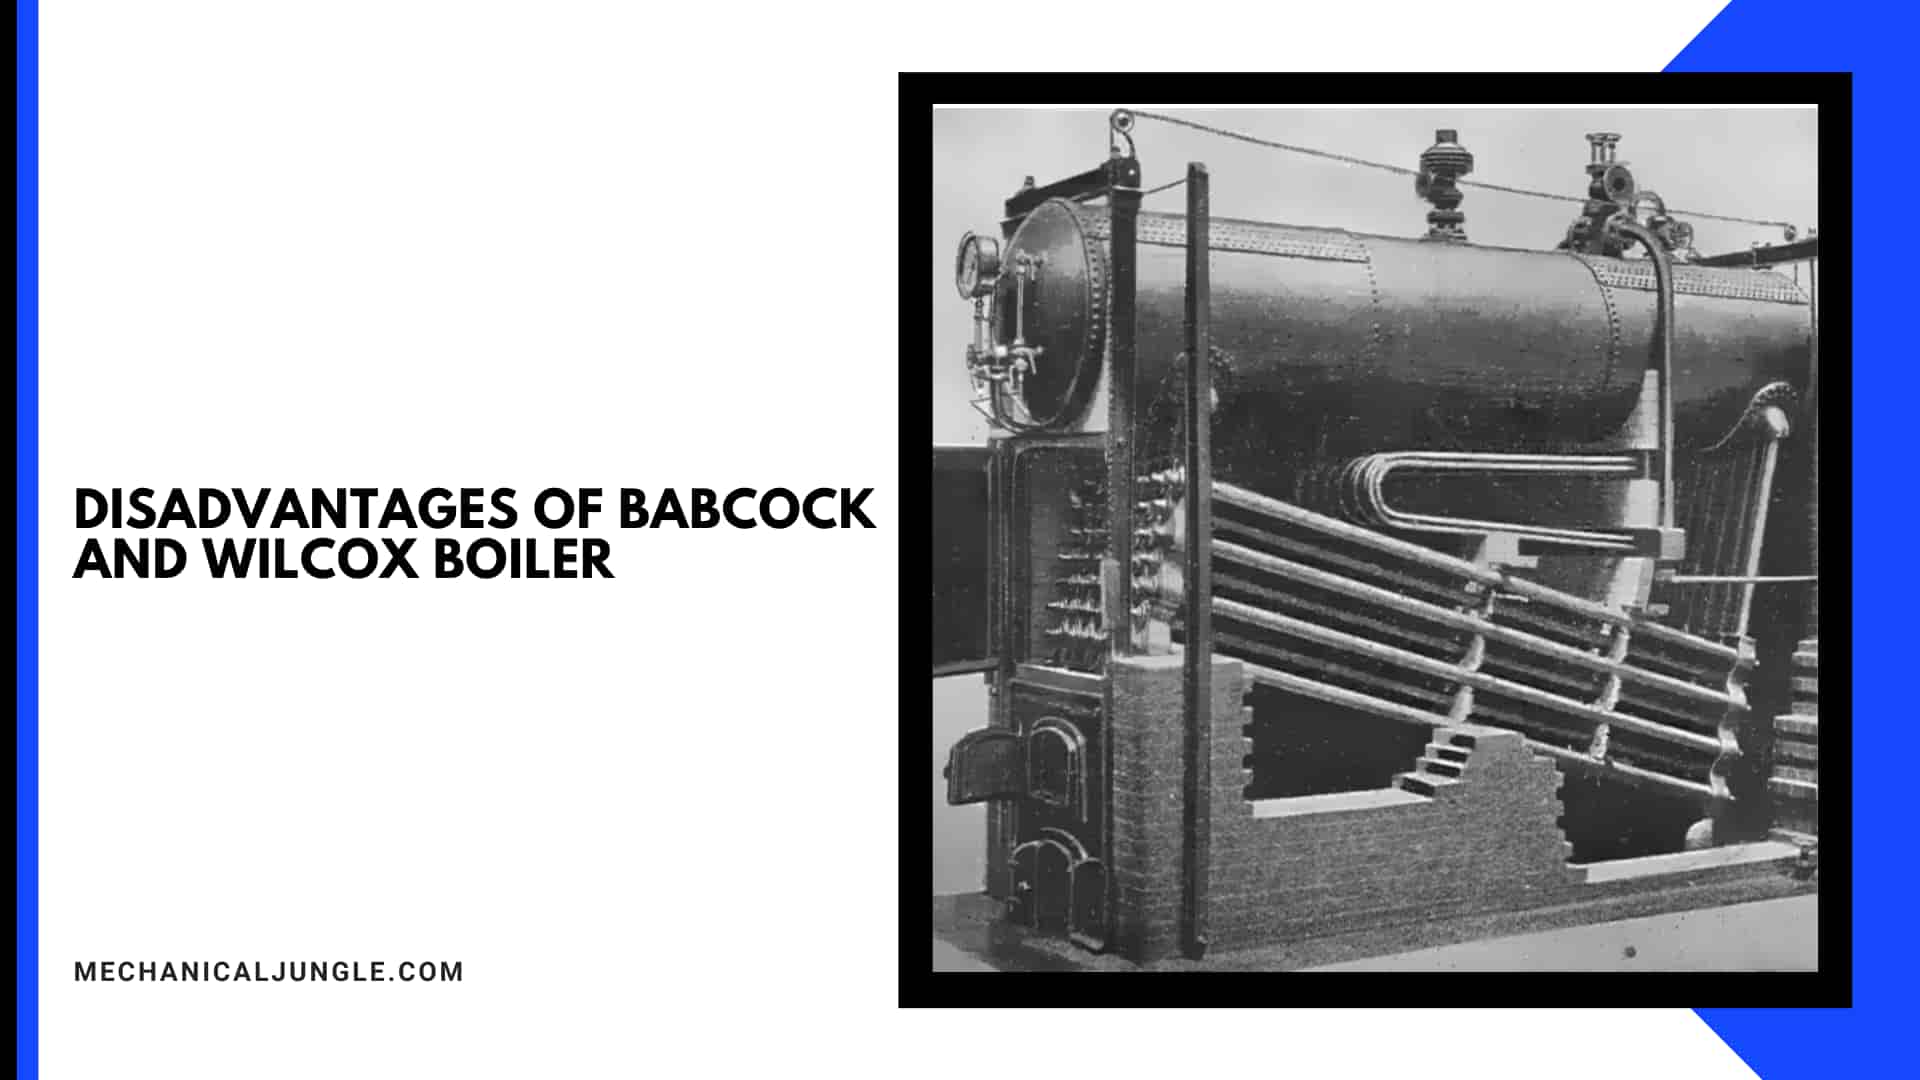 Disadvantages of Babcock and Wilcox Boiler